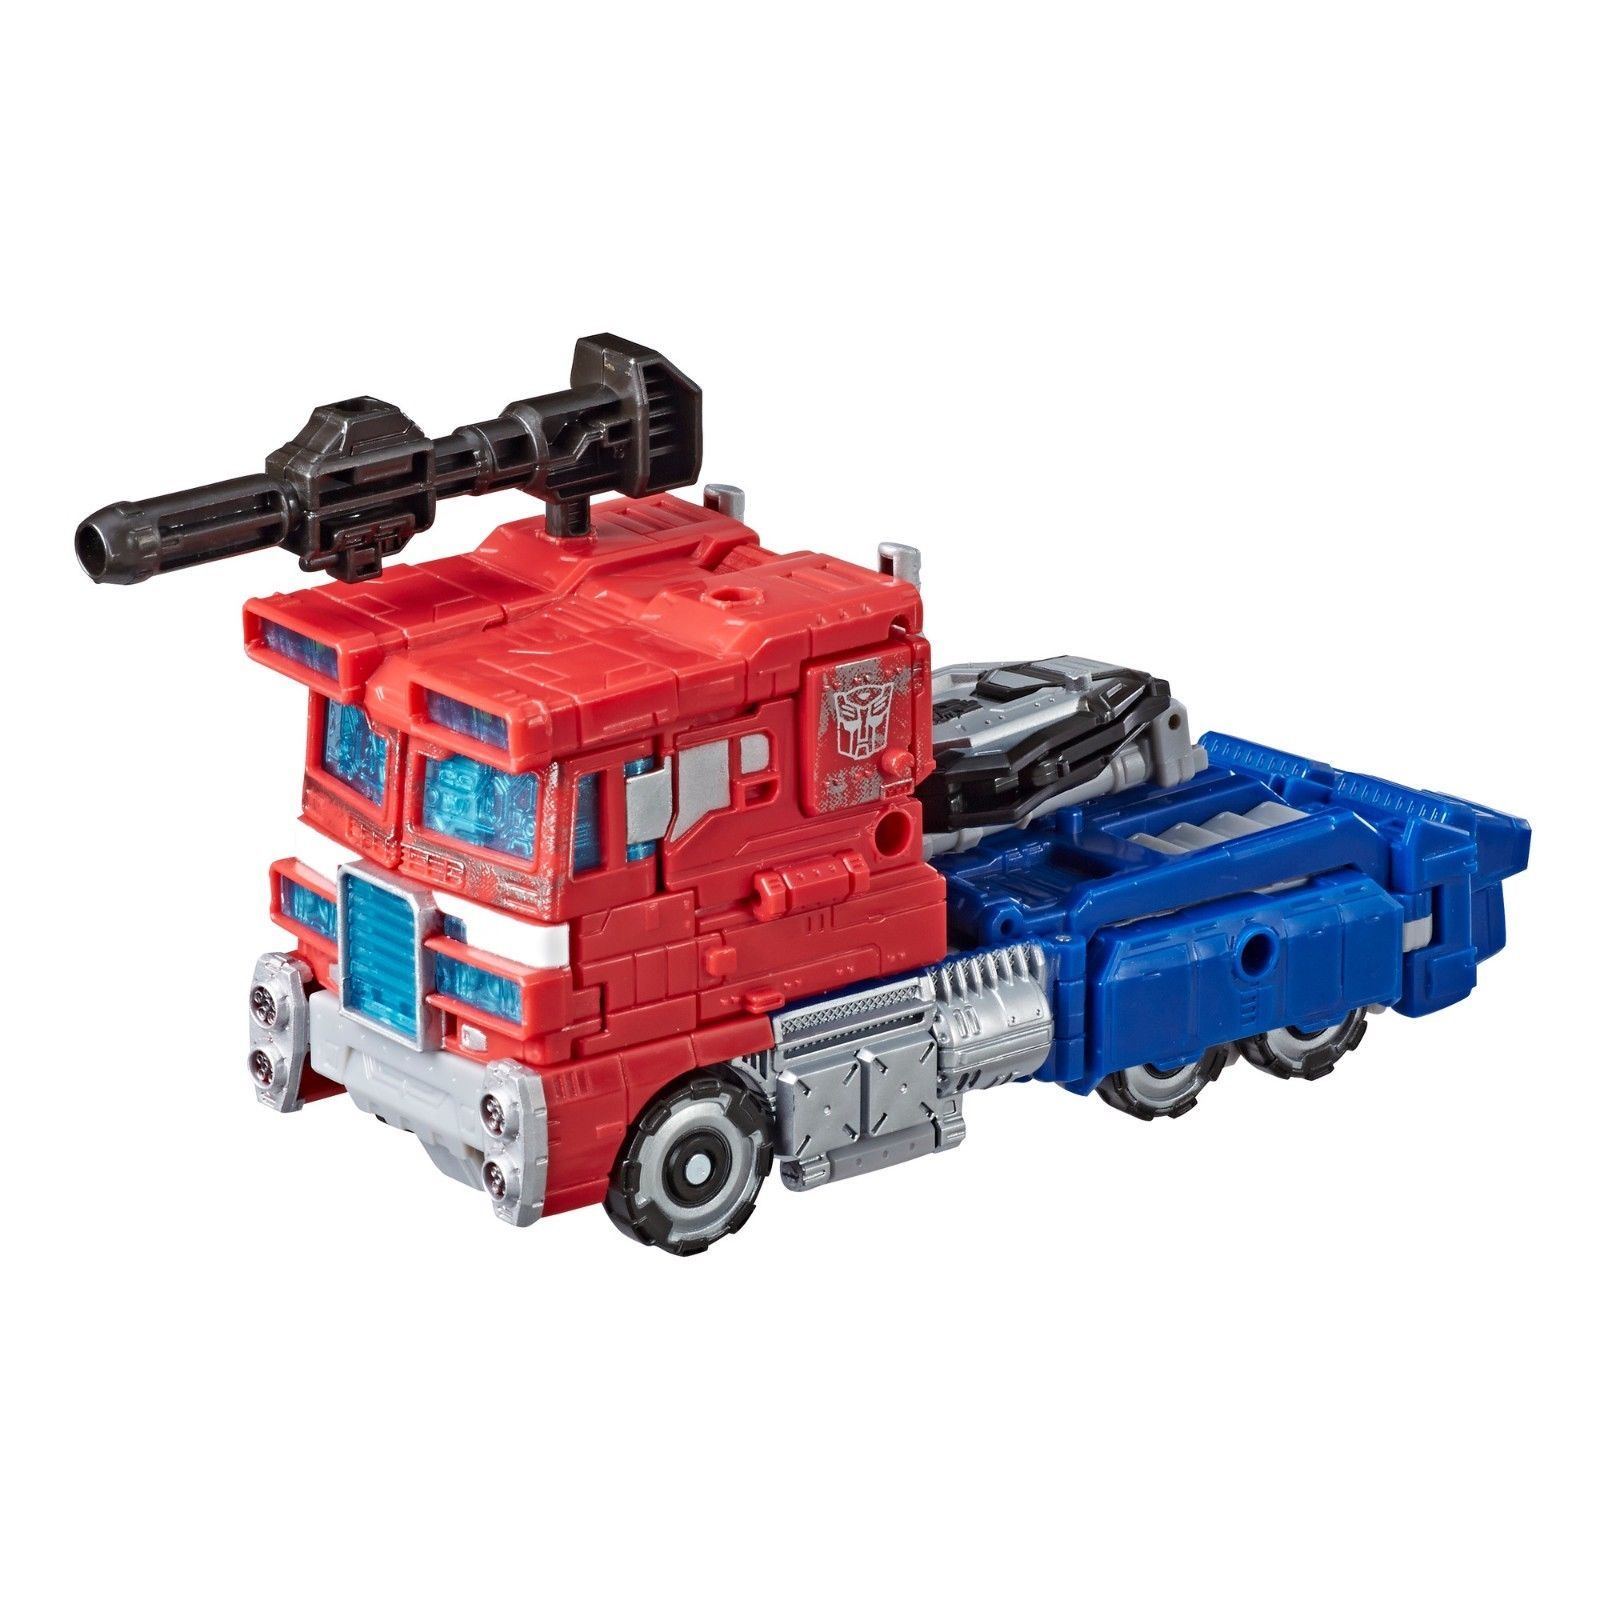 Transformers Generations War For Cybertron: Siege Voyager Optimus Prime Action Figure WFC-S11